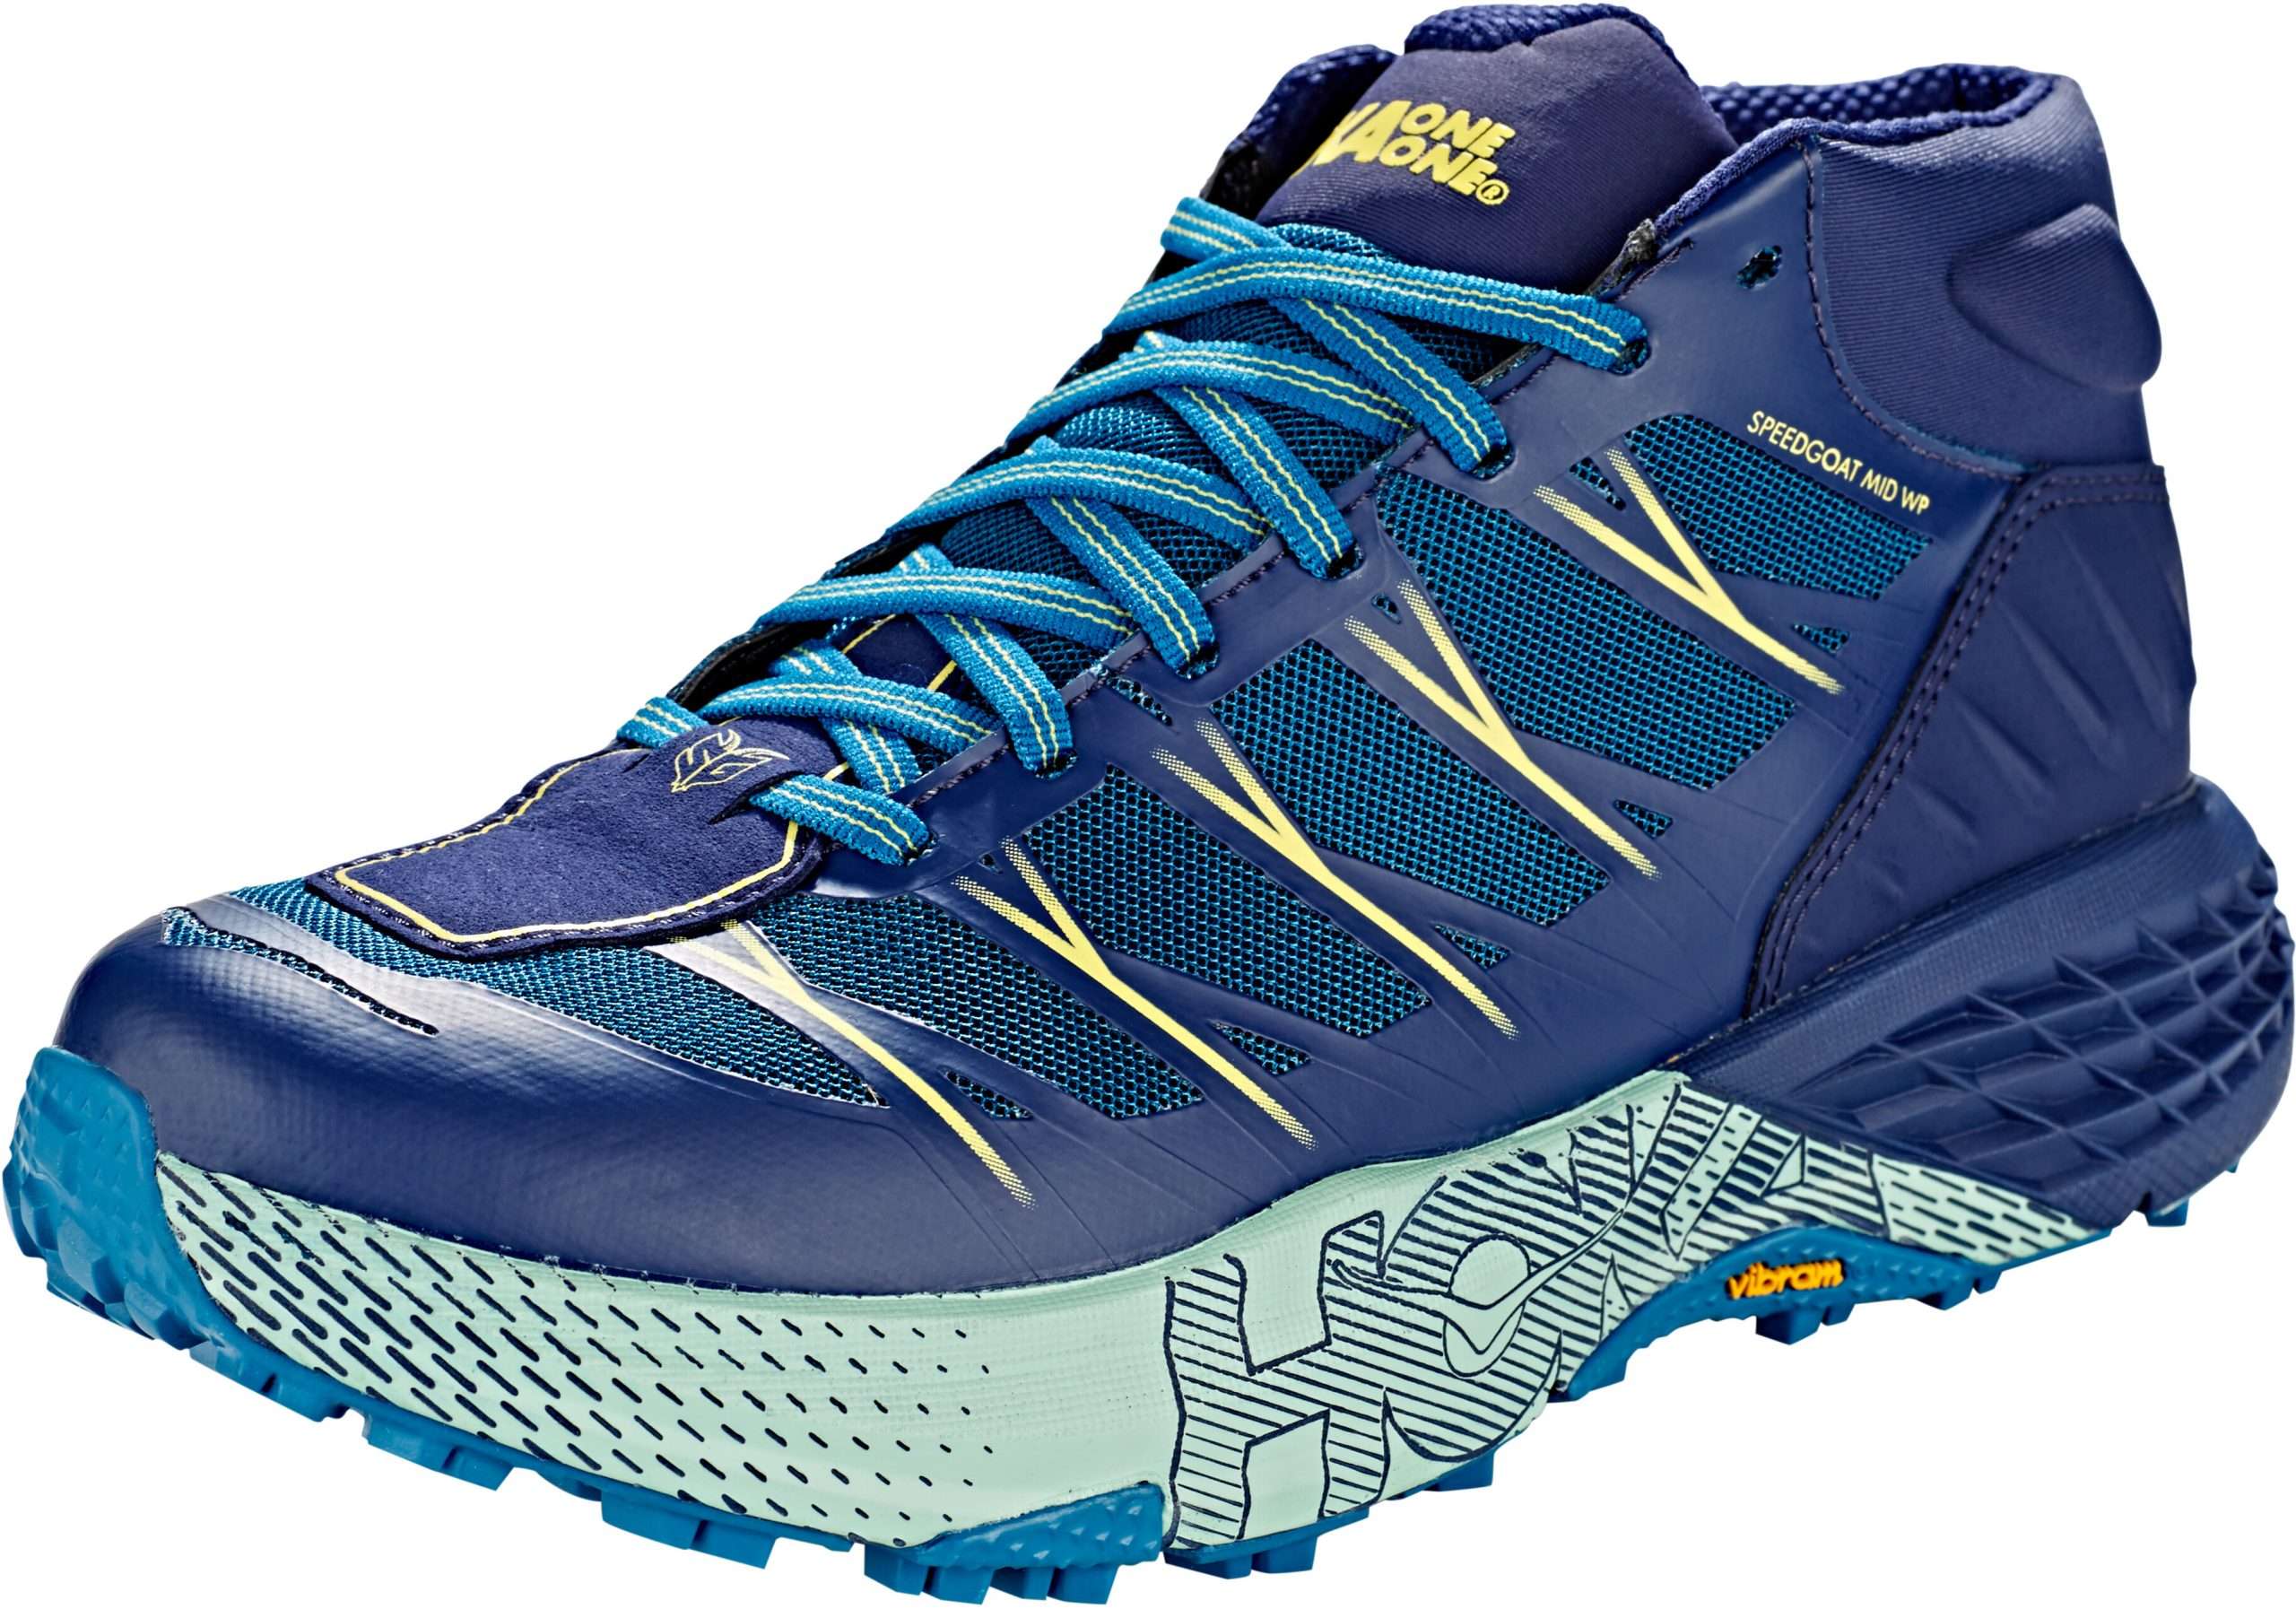 Hoka One One Speedgoat WP Mid Running Shoes Women seaport/medieval blue ...